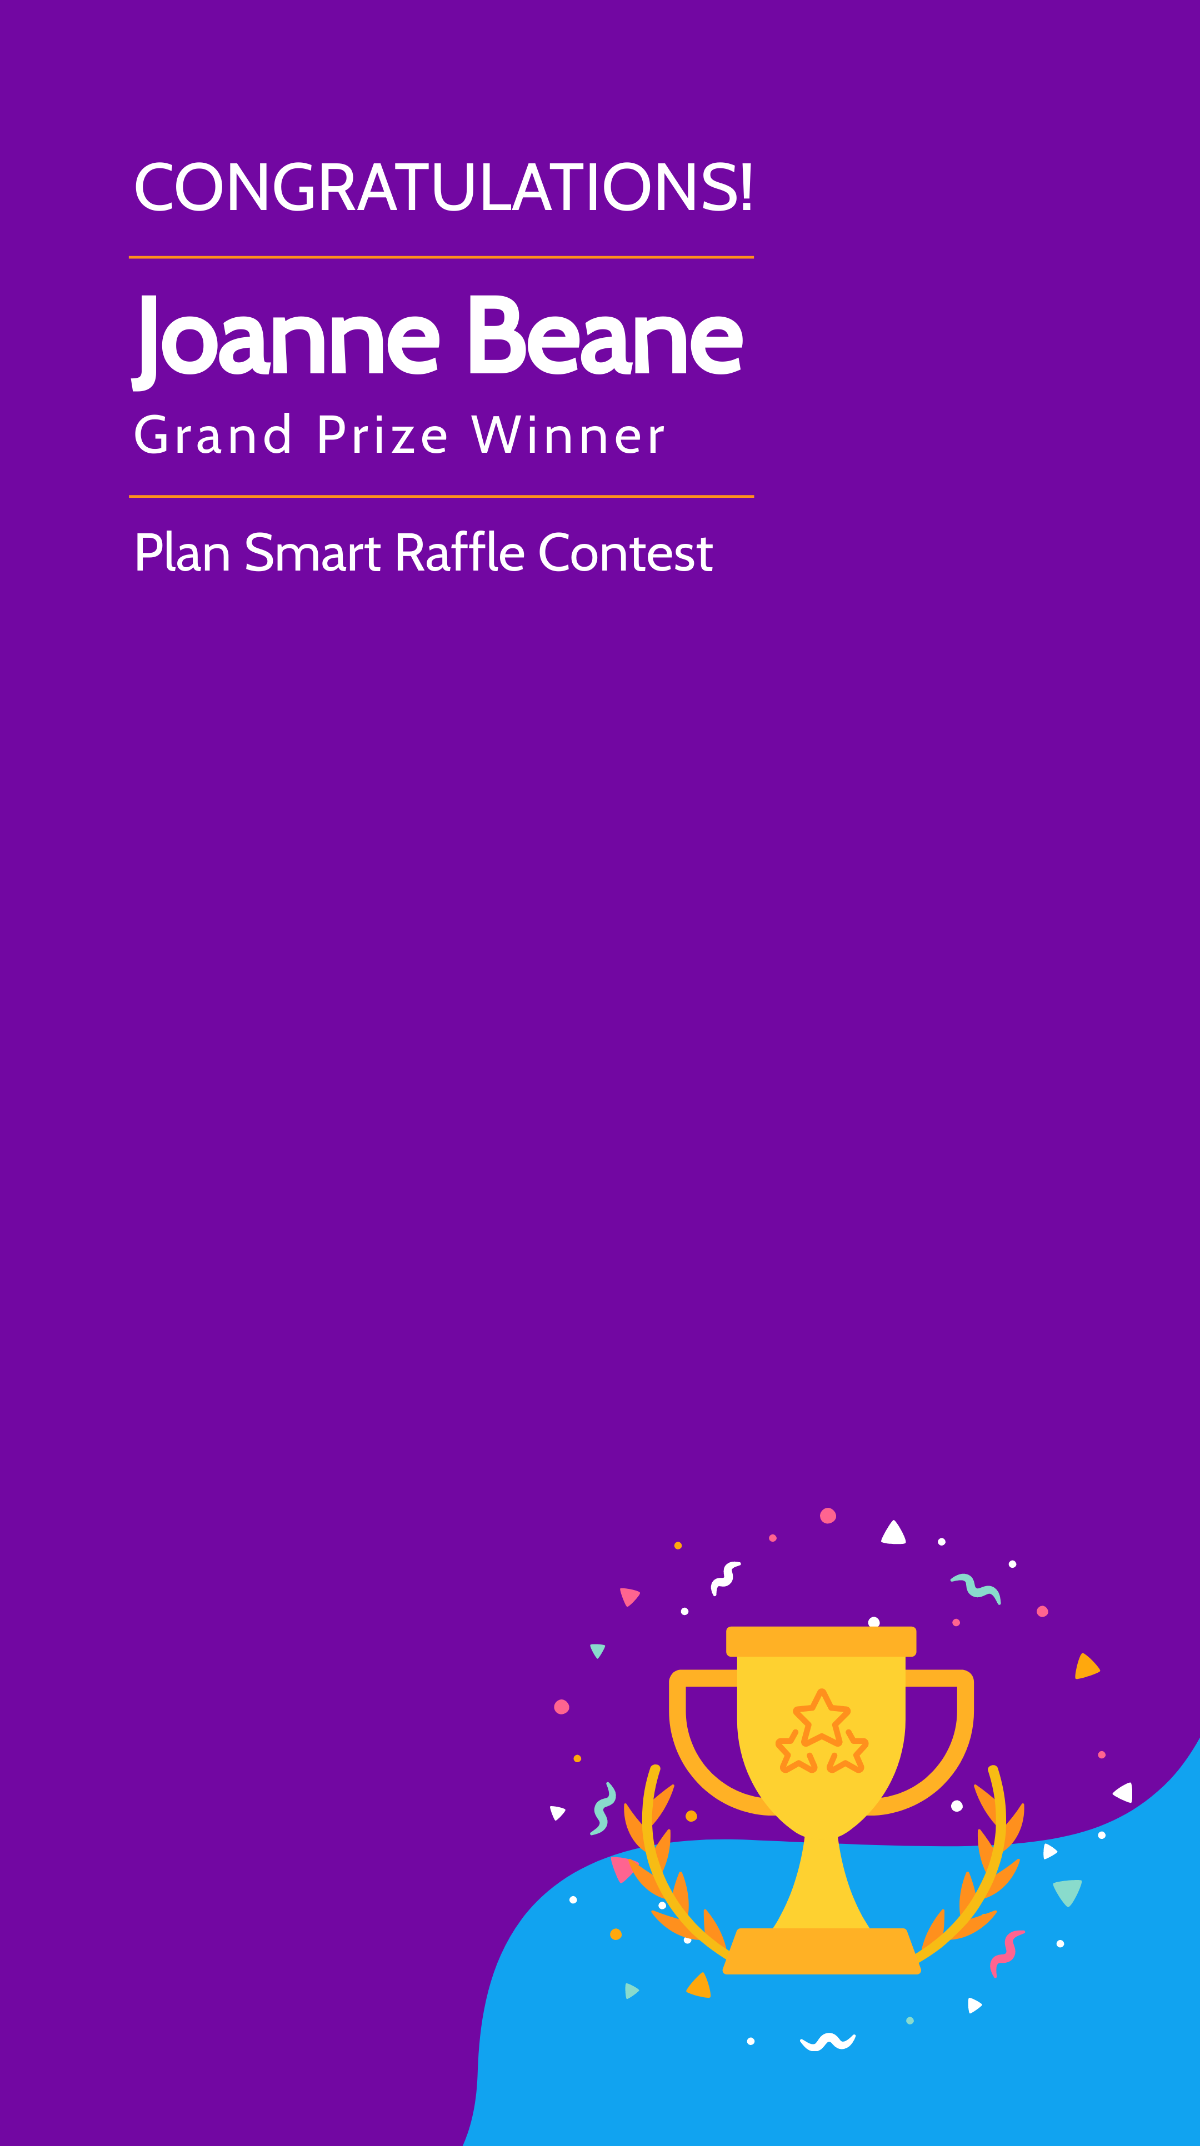 Contest Winner Announcement Snapchat Geofilter Template